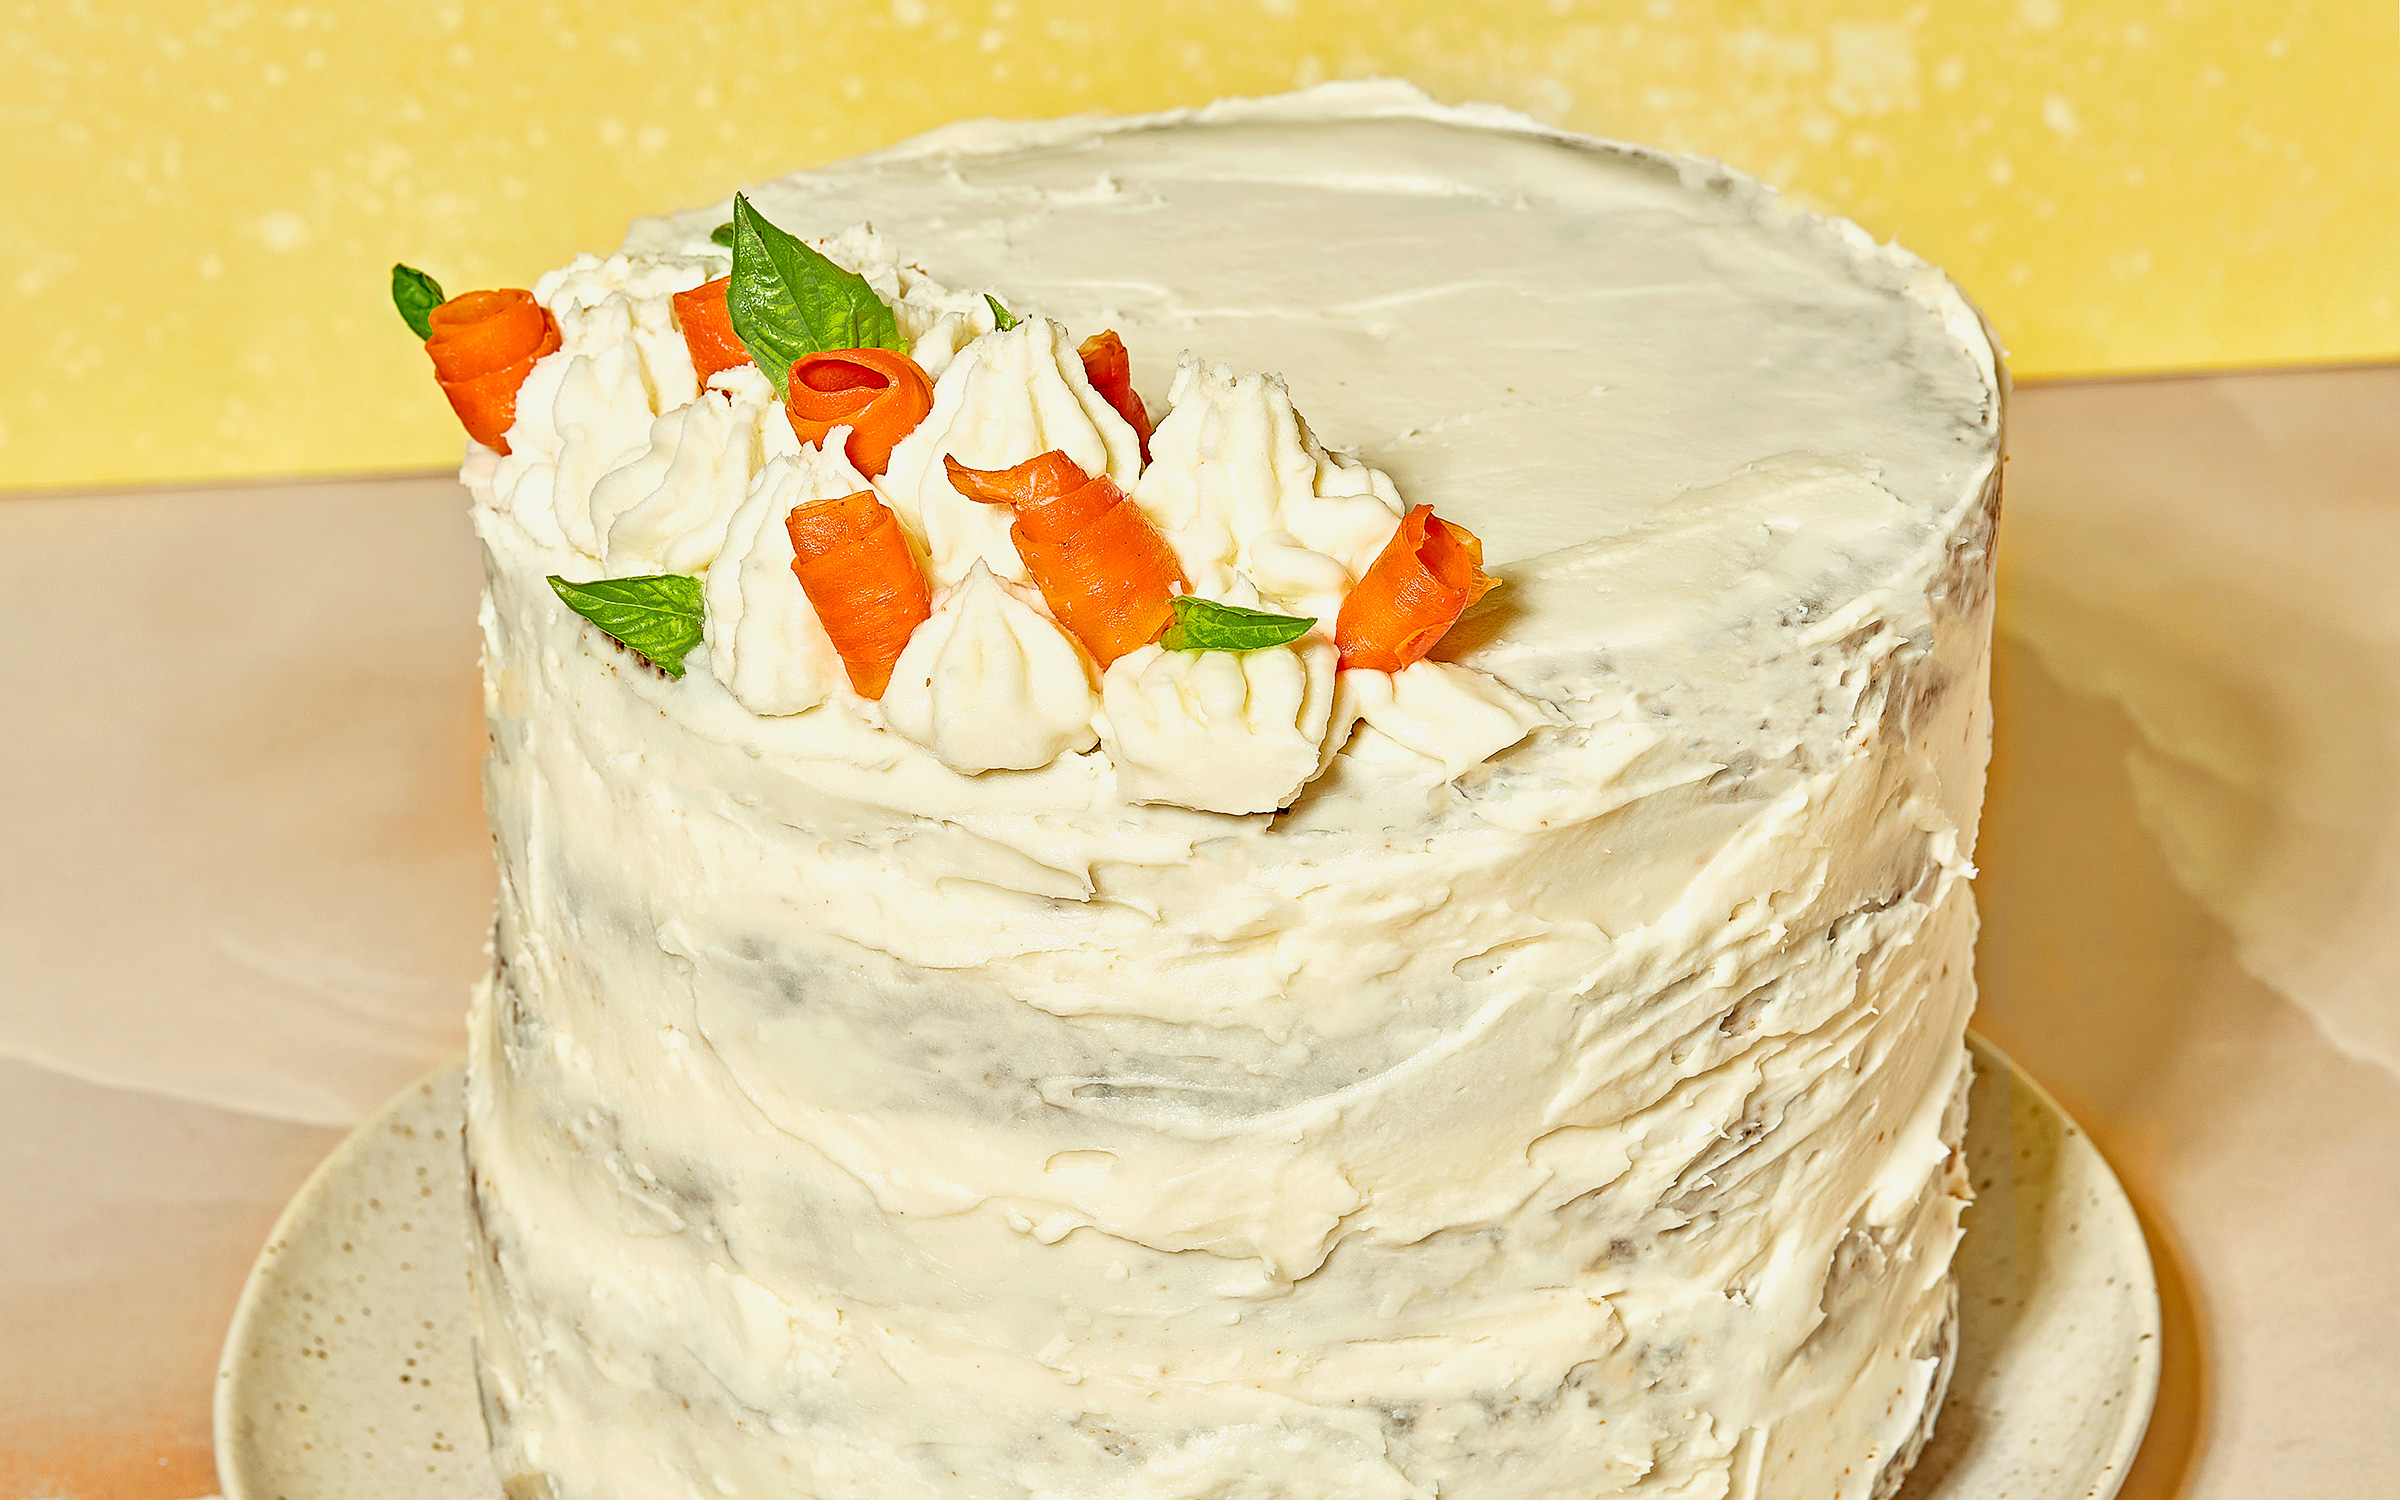 Carrot Cake Cheesecake Cake | Tasty Carrot Cake Recipe From Scratch